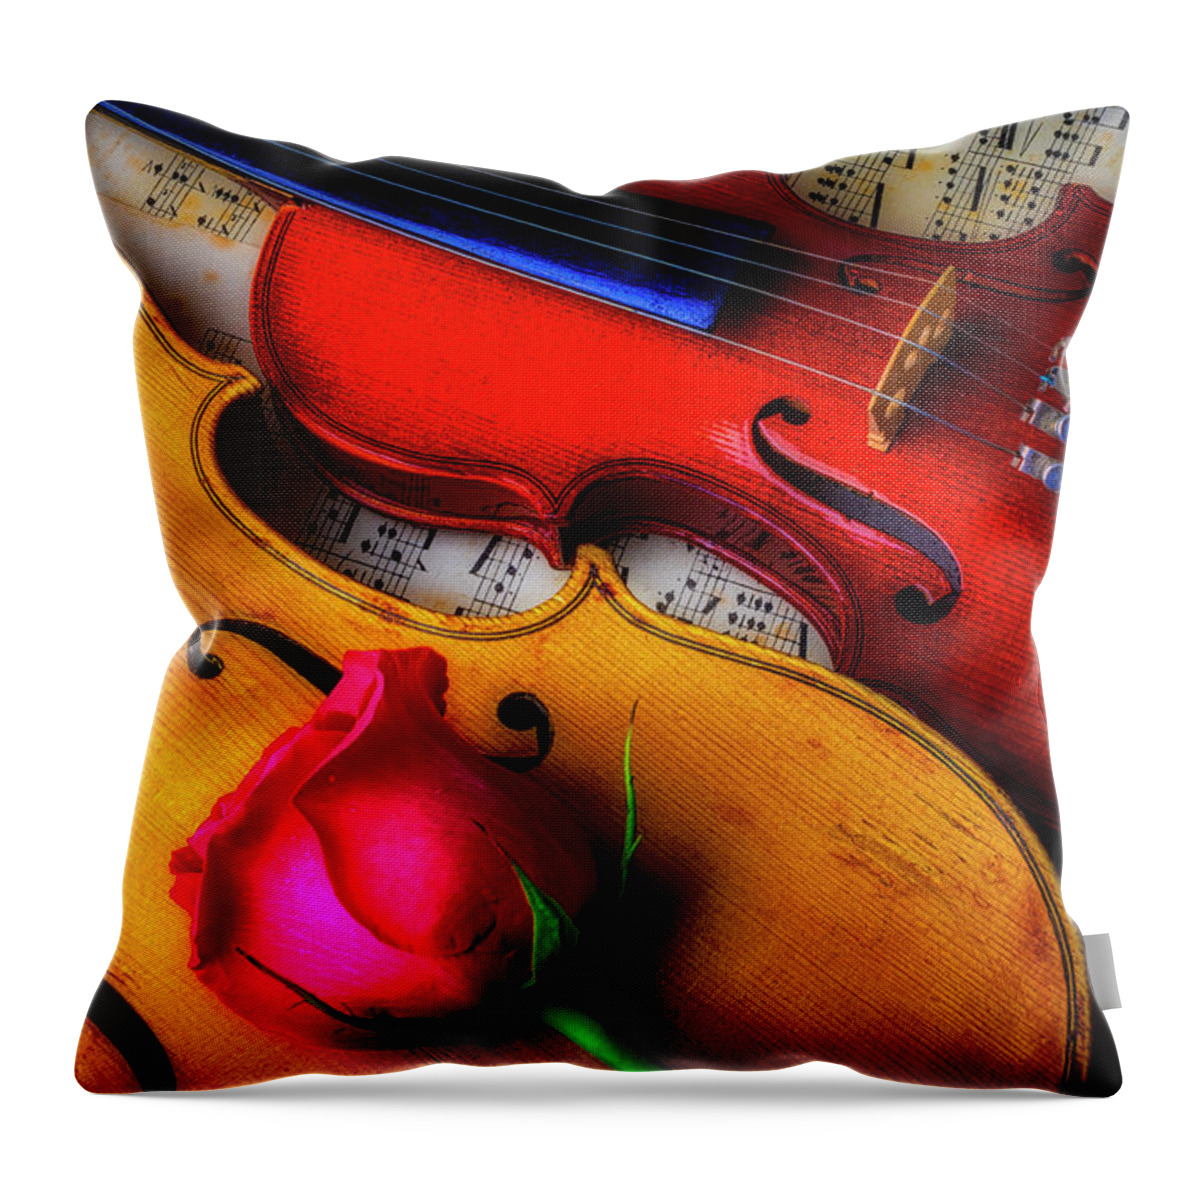 Red Throw Pillow featuring the photograph Rose And Two Violins by Garry Gay